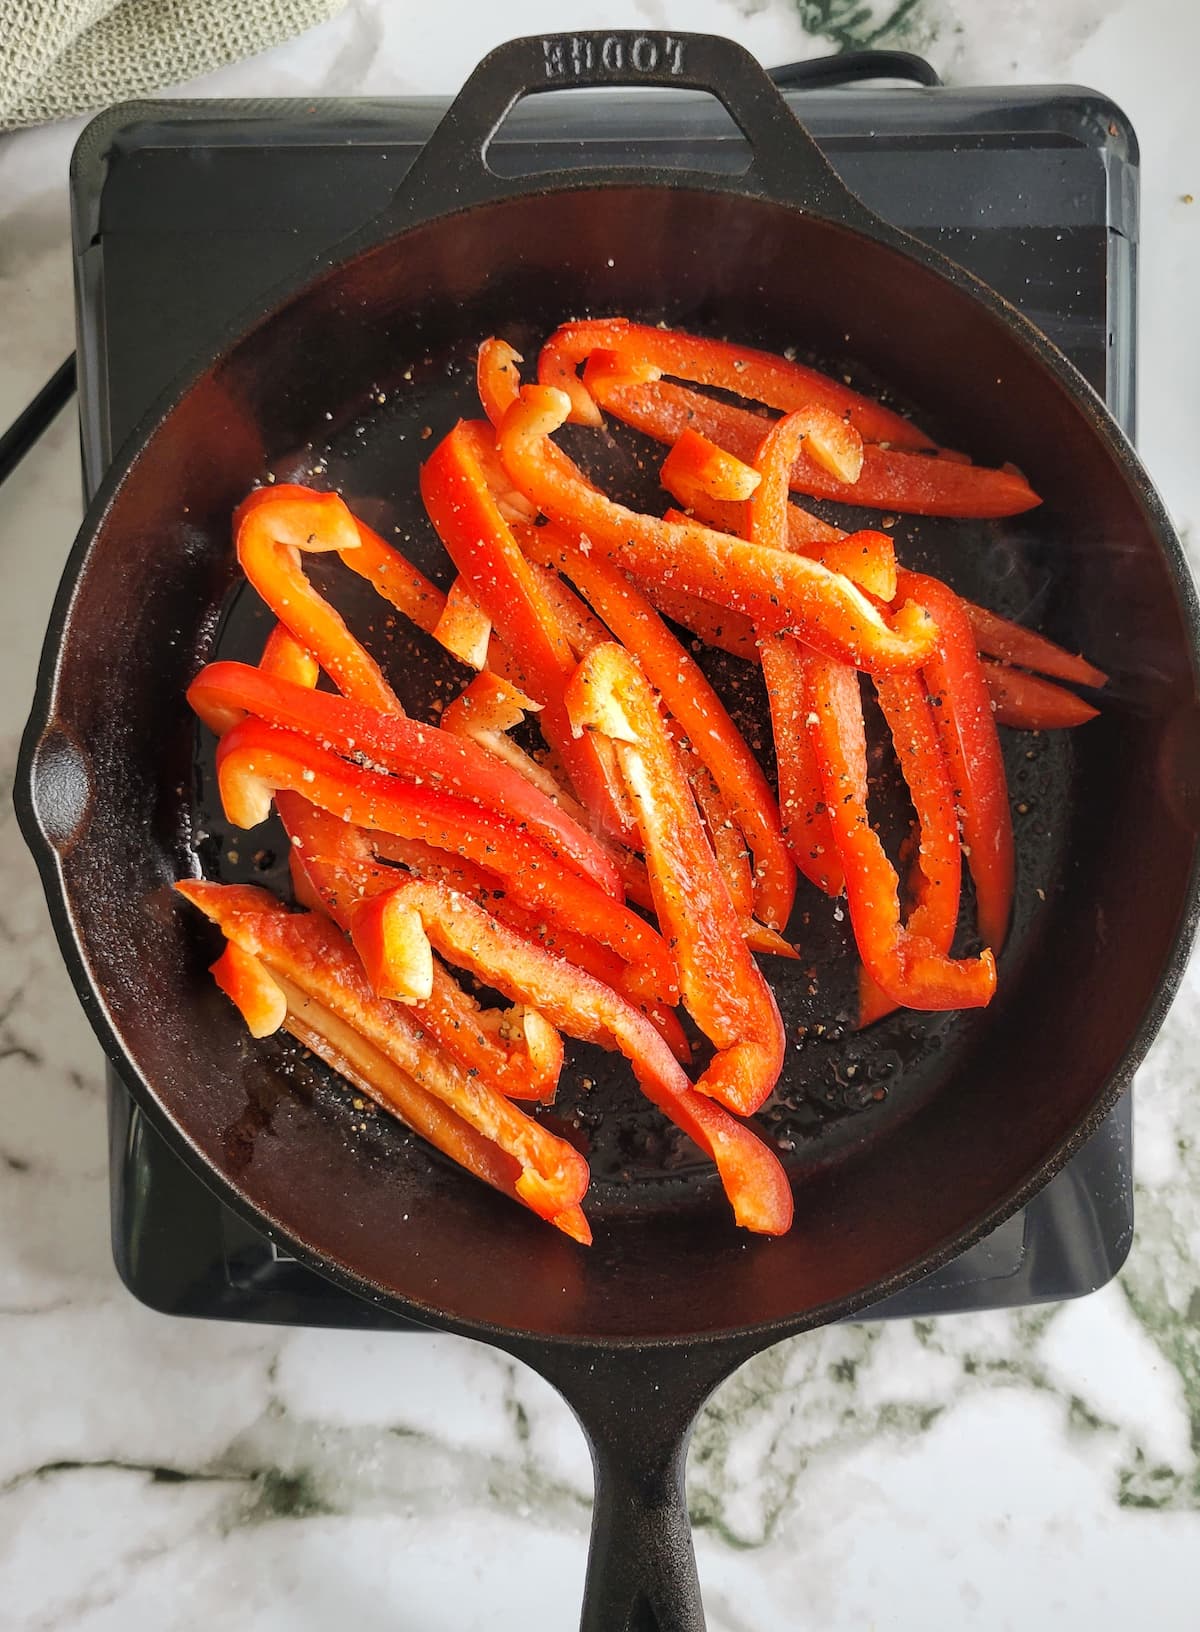 sliced red bell peppers seasoned with salt and pepper in a black cast iron skillet